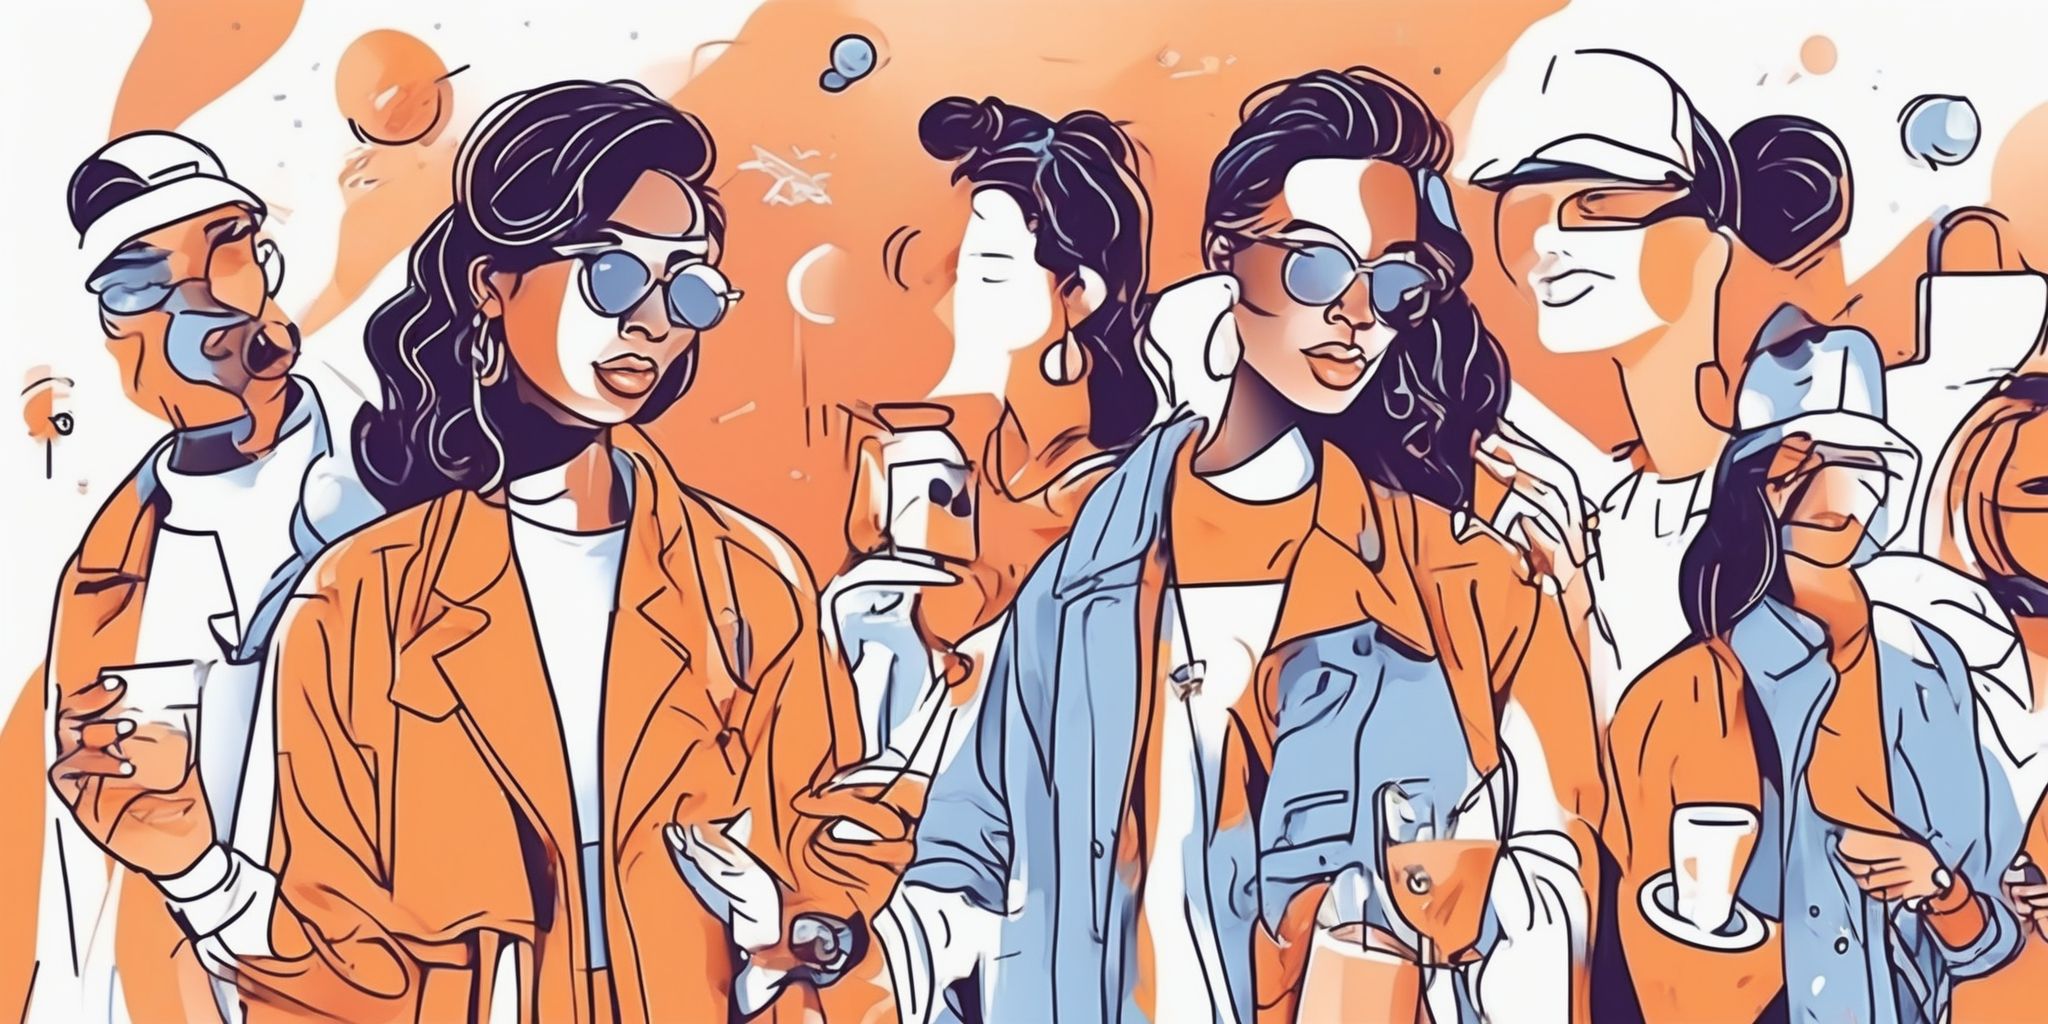 influencer in illustration style with gradients and white background